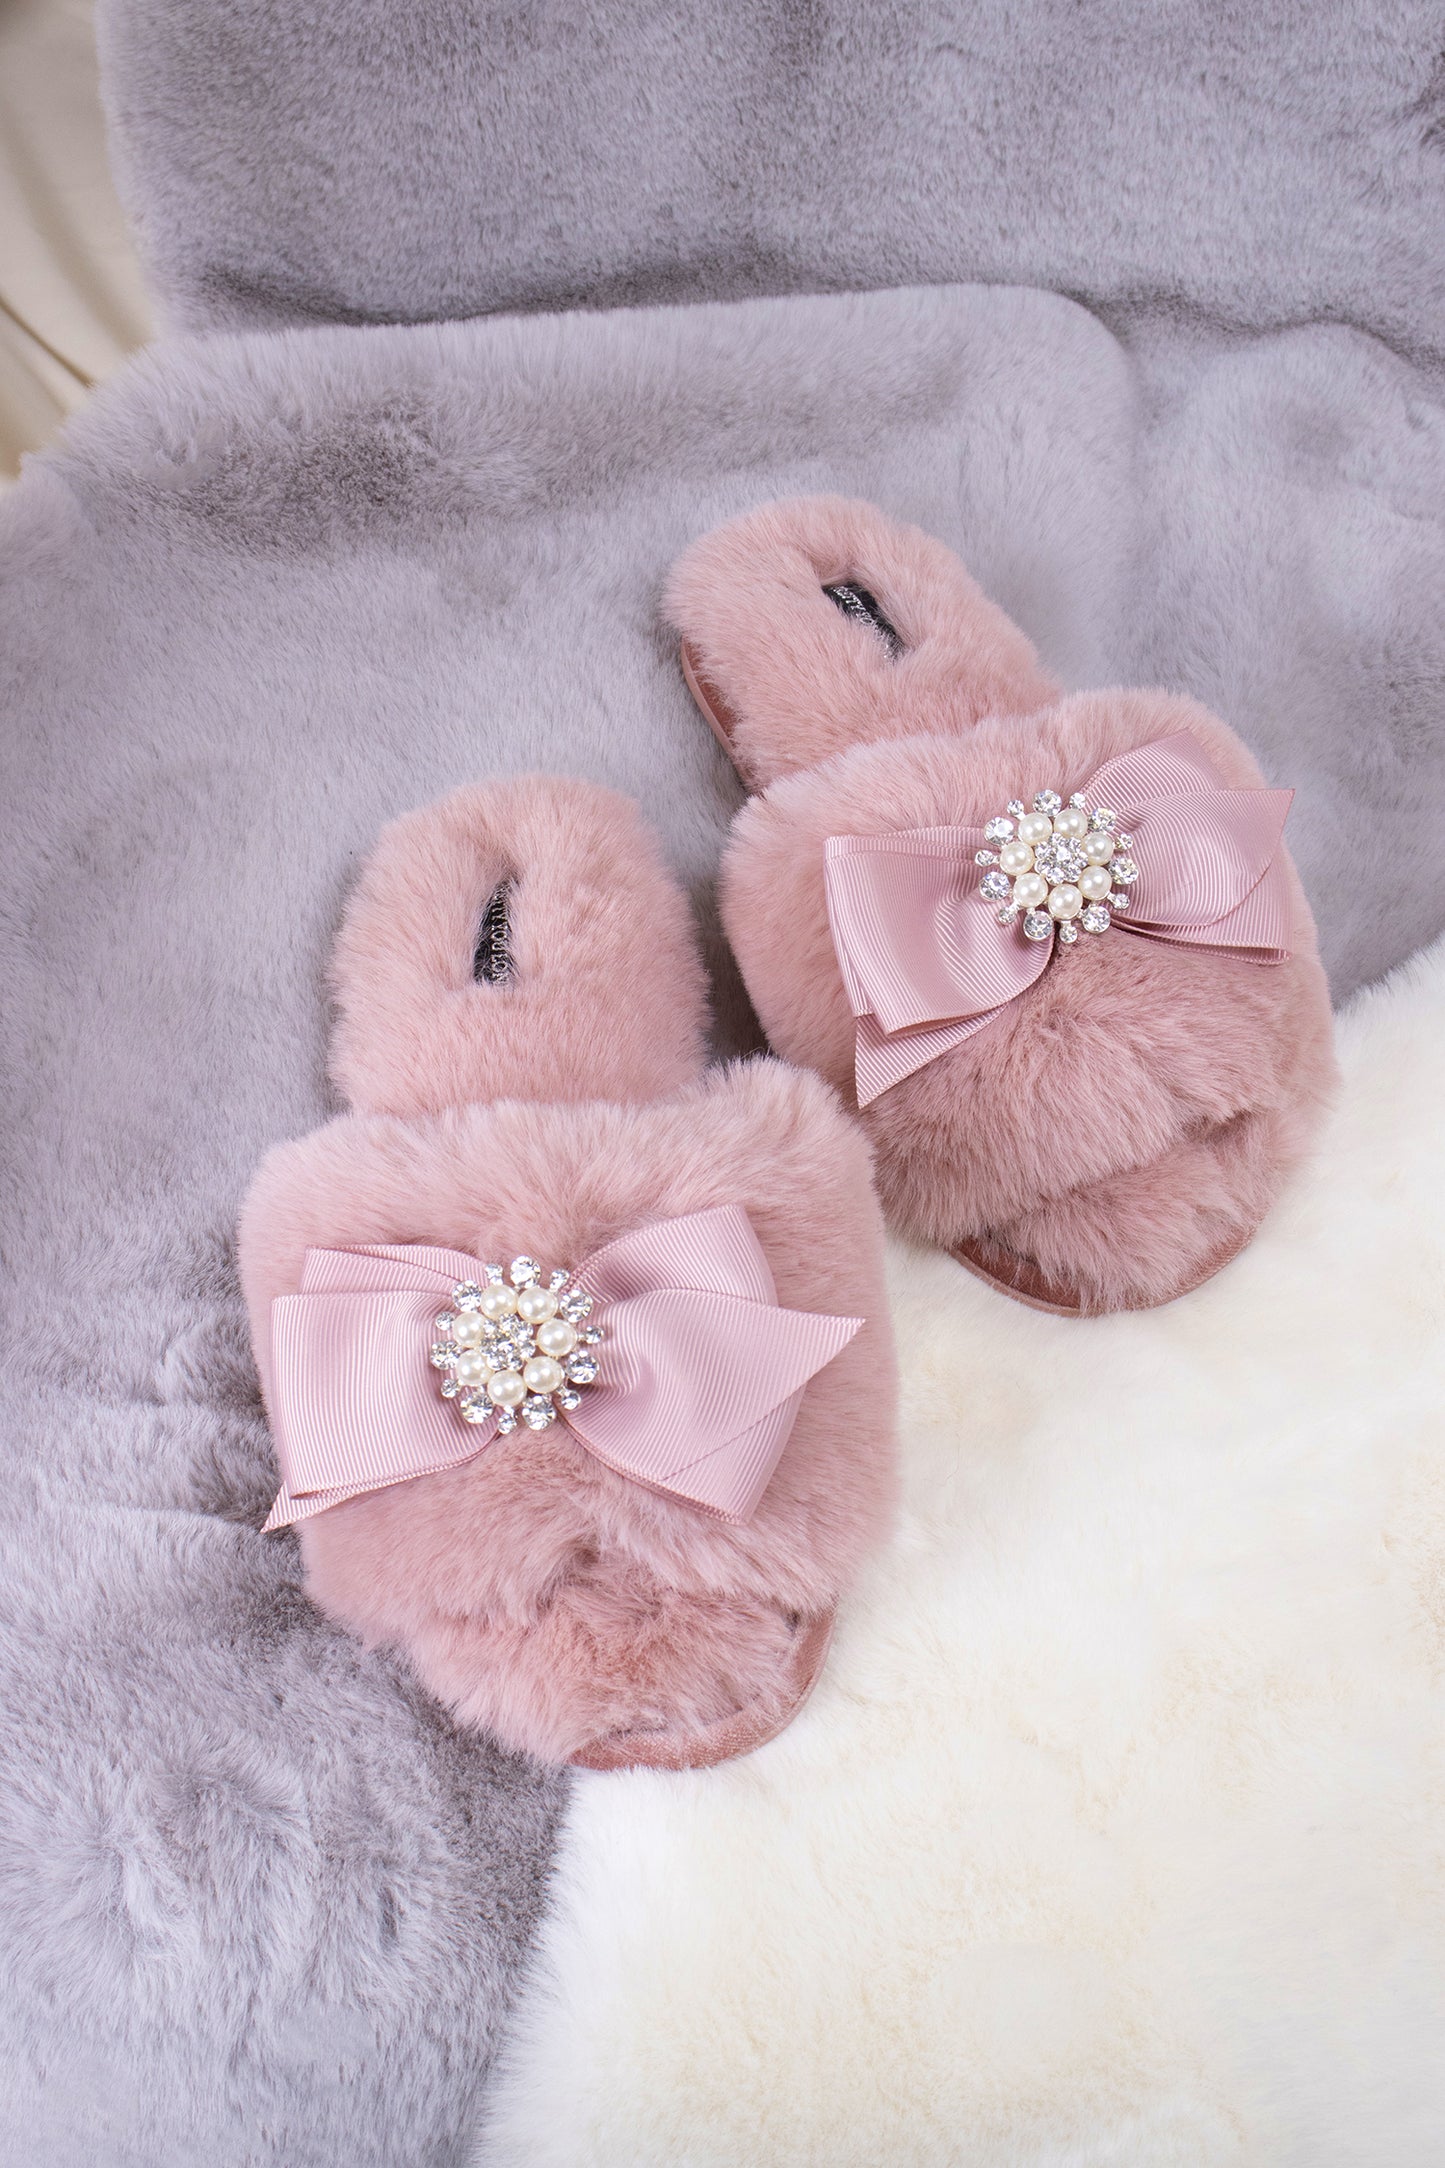 Anya women's slider slippers in pink using the softest faux furs and topped with a premium grosgrain bow finished with a jewel pearl embellishment from Pretty You London